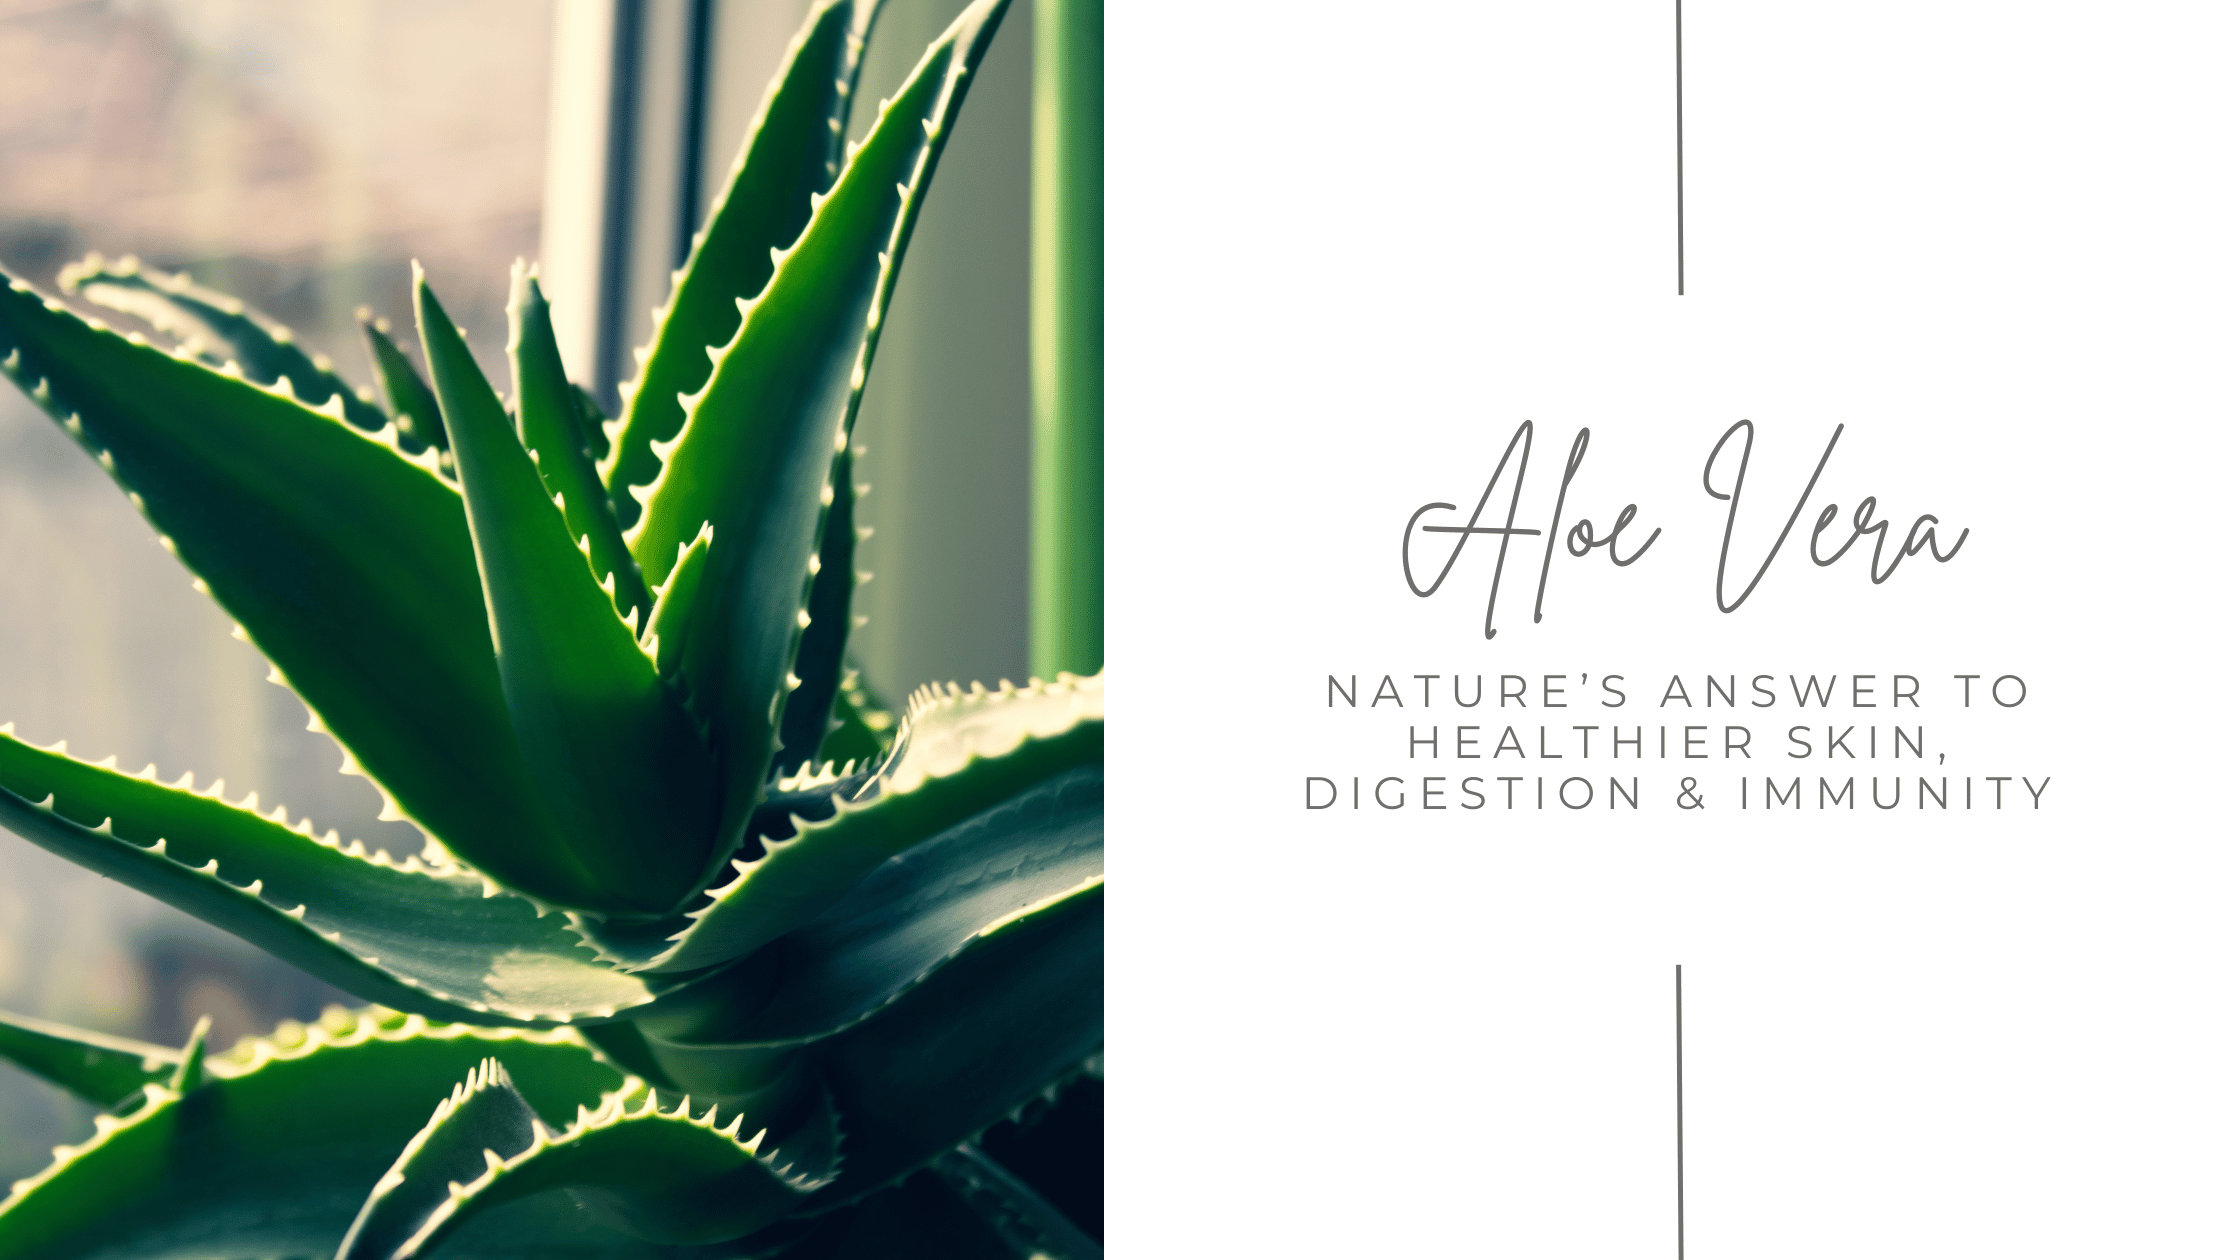 Aloe Vera: Nature’s Answer to Healthier Skin, Digestion, and Immunity